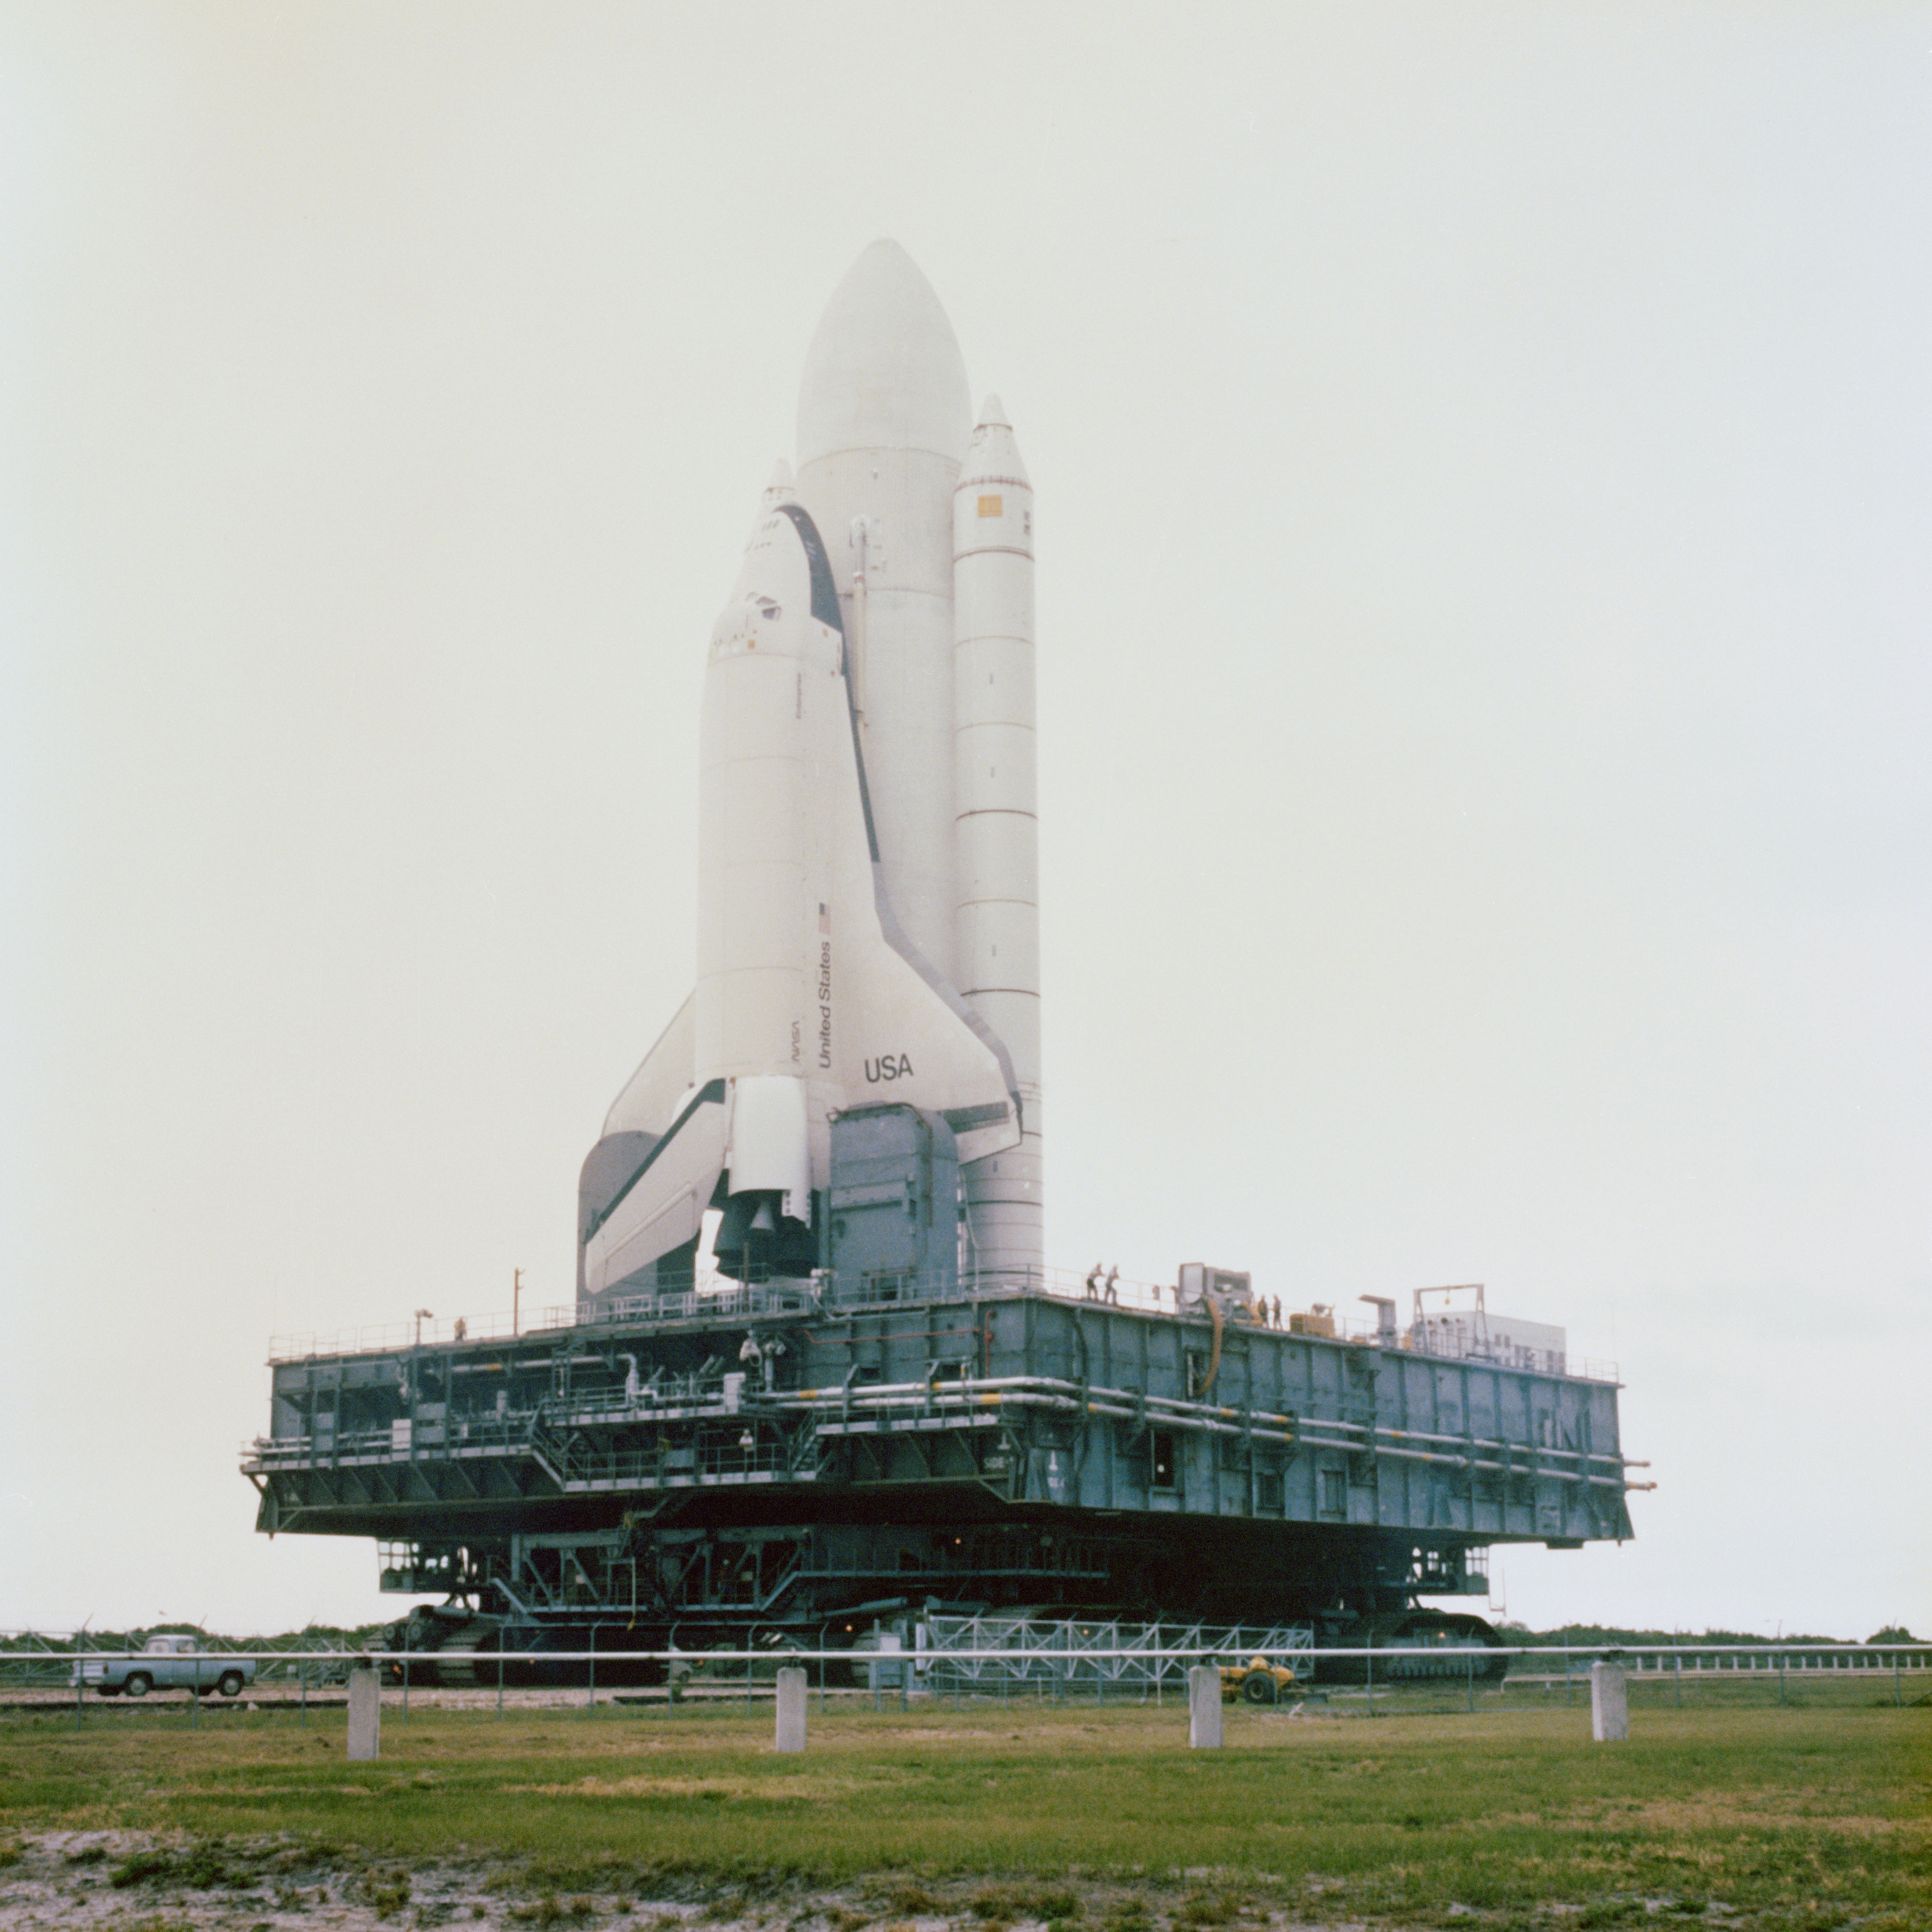 Enterprise on its Mobile Launch Platform during the rollout to the pad